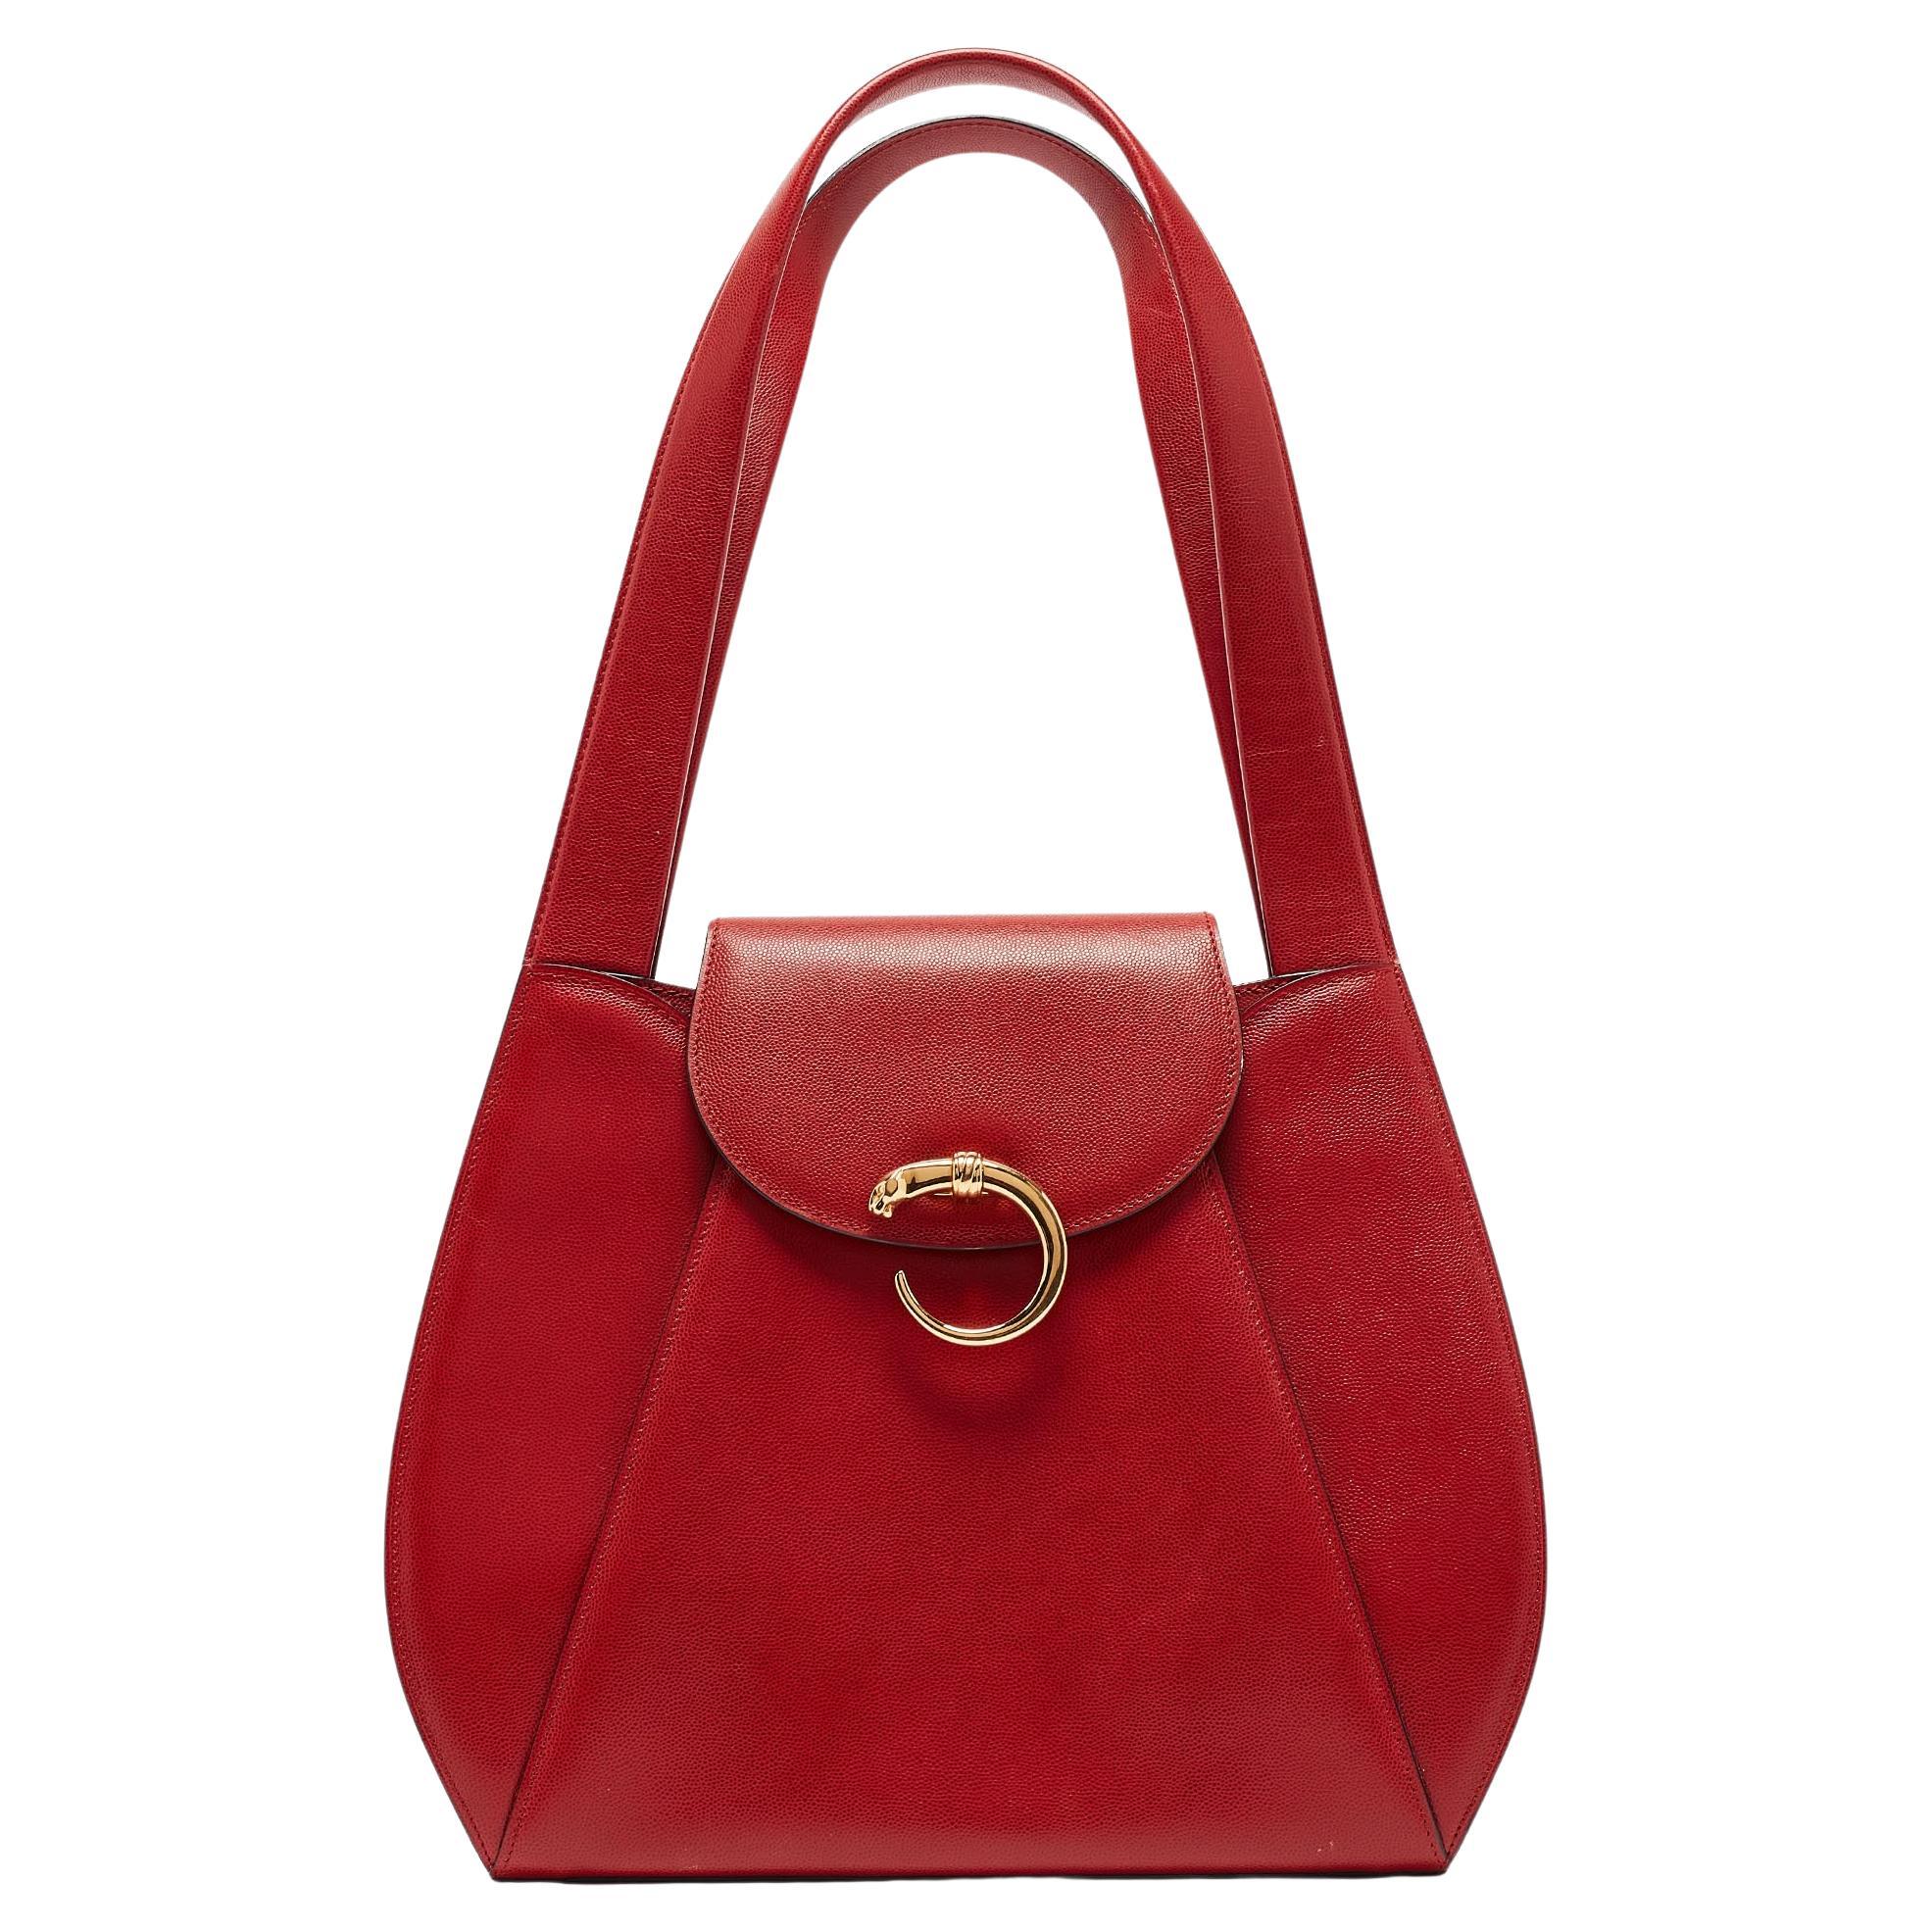 Cartier Red Leather Panthere Shoulder Bag For Sale